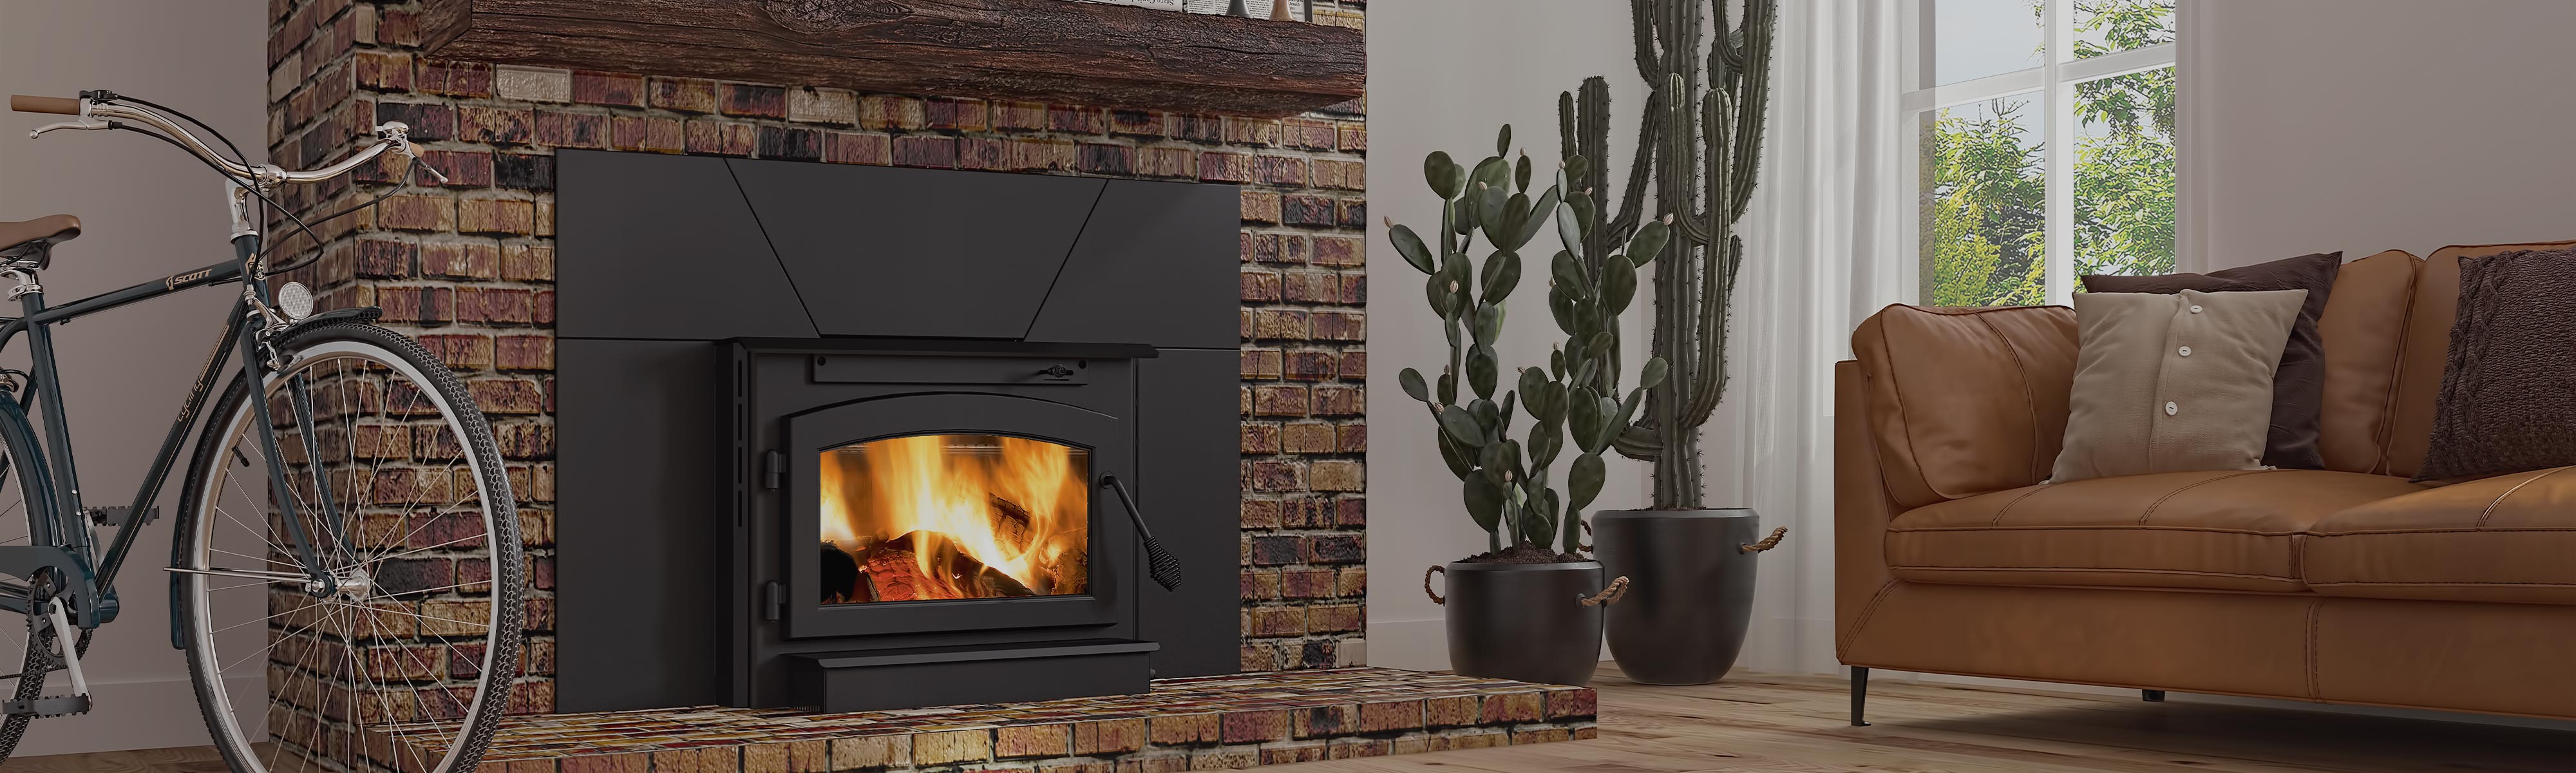 Home page Wood Fireplace hero banner image